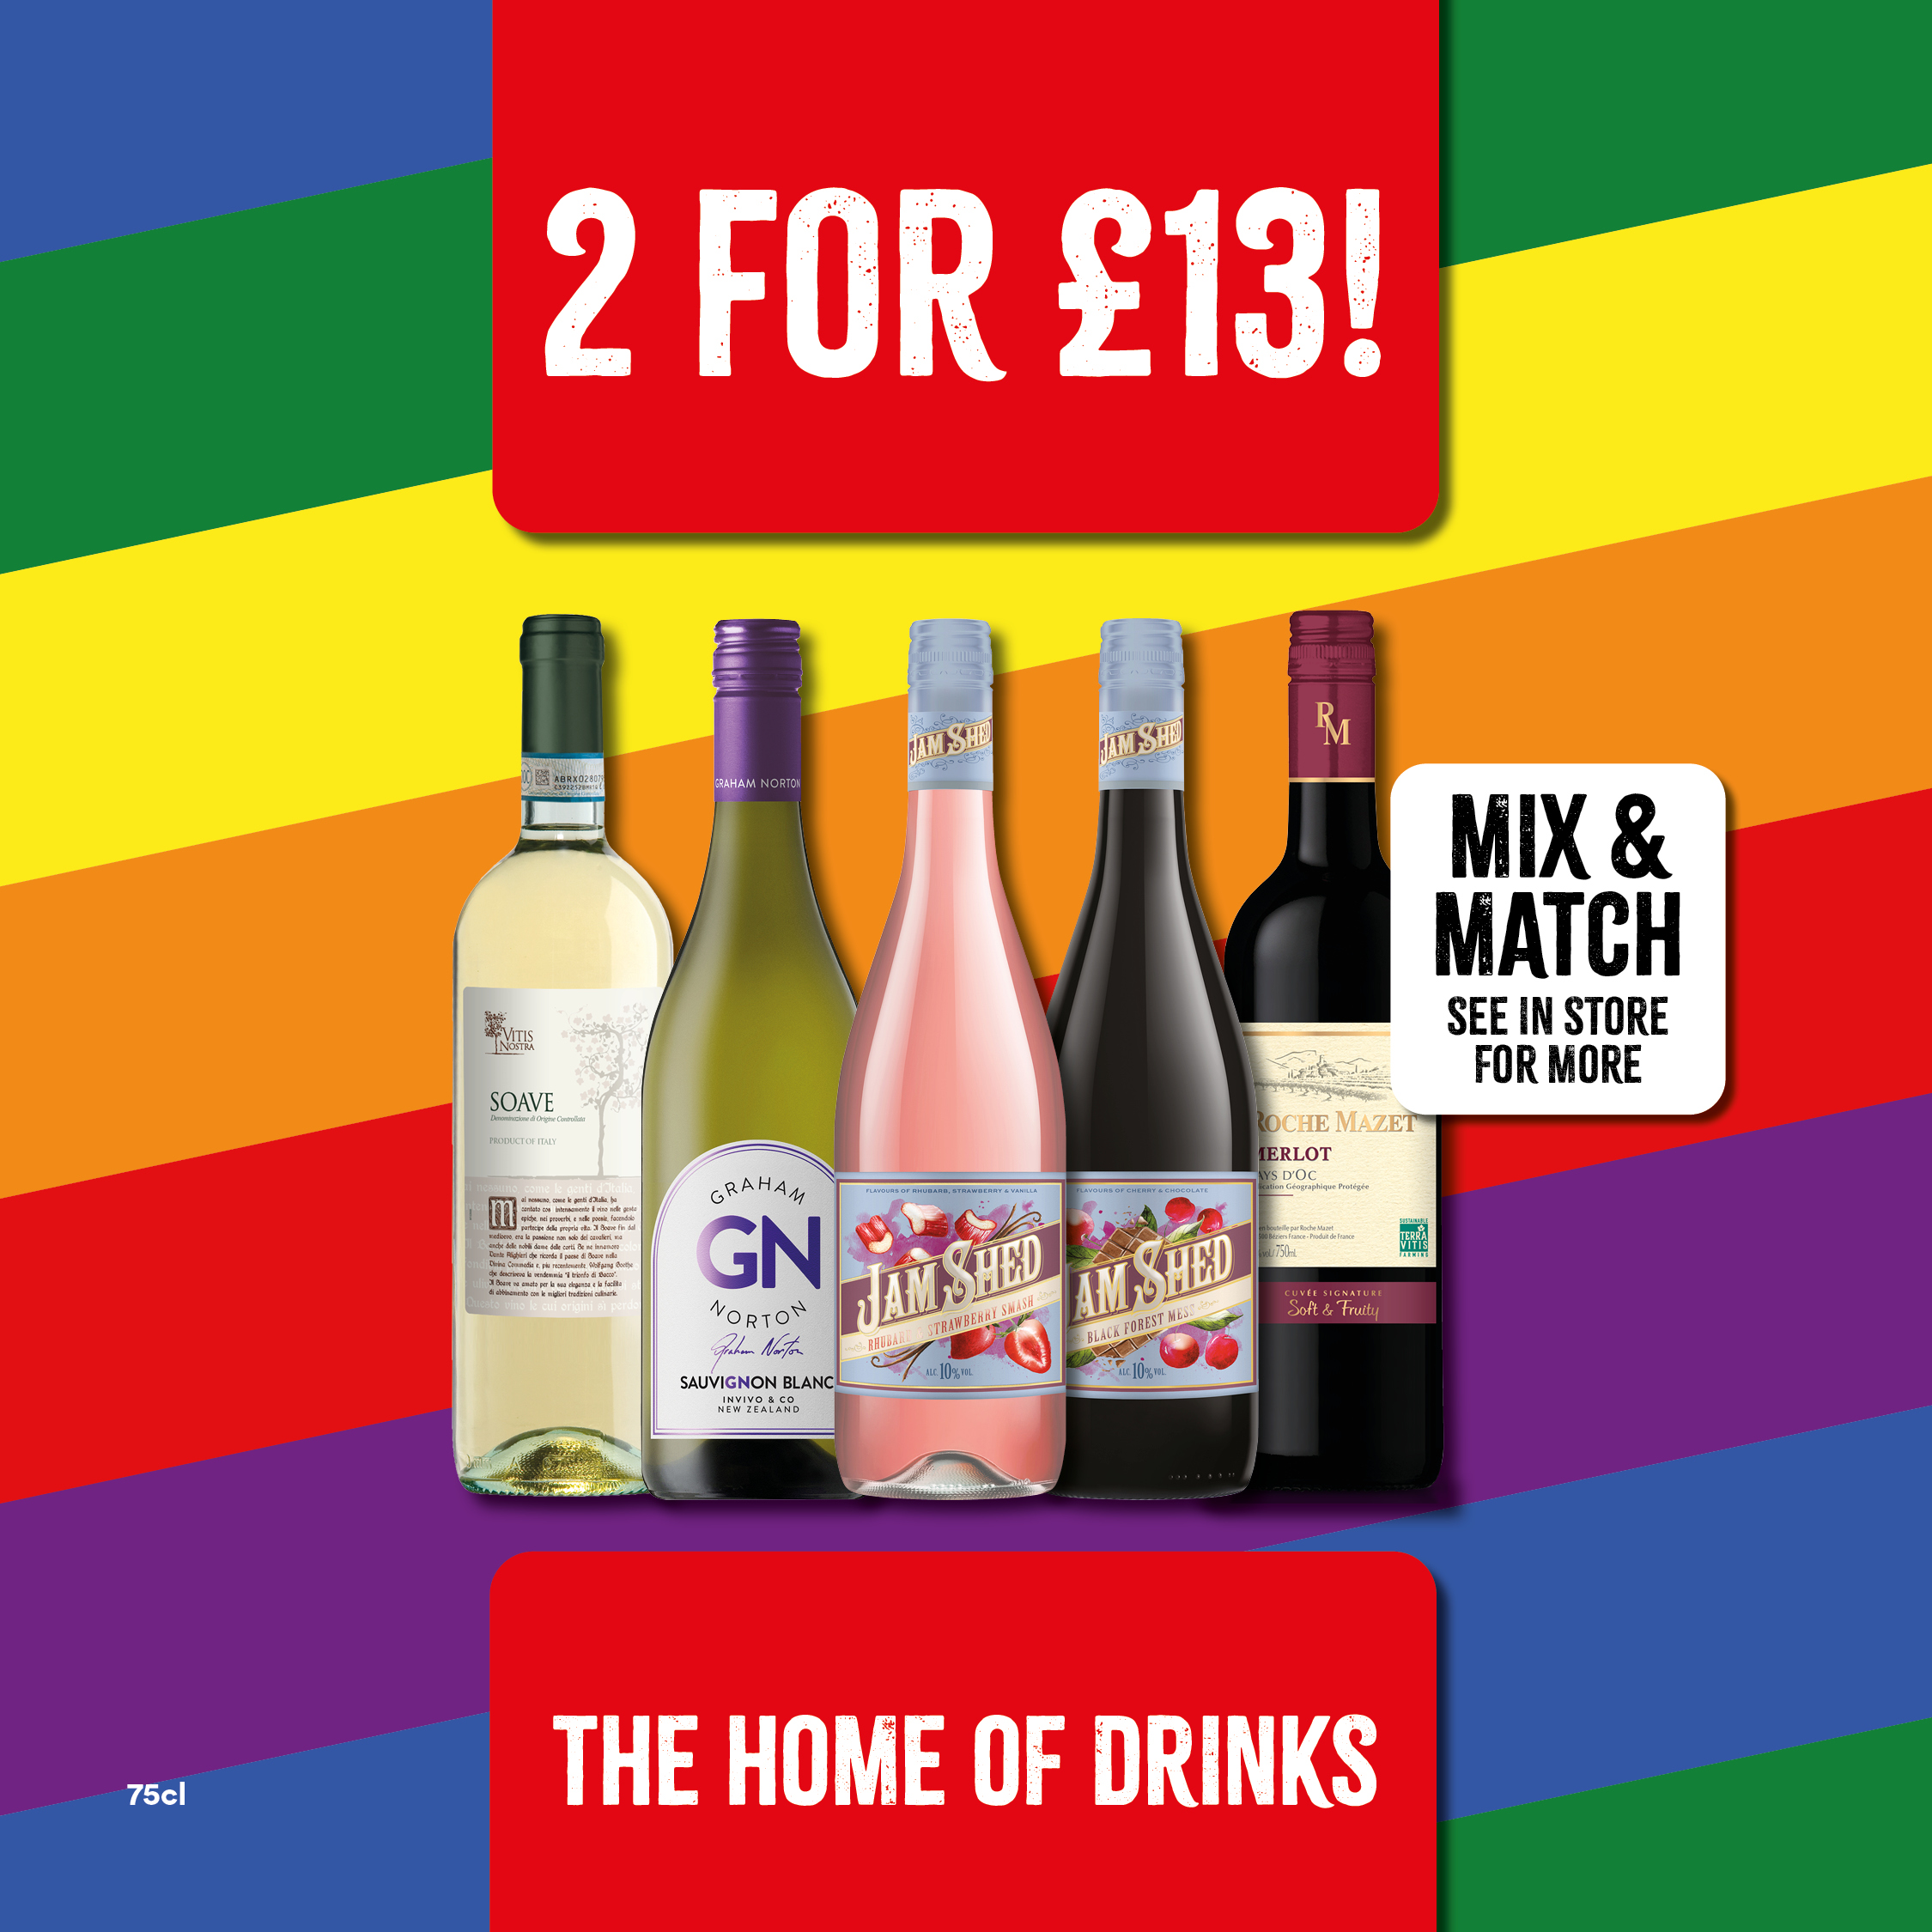 2 for £13 on selected wines Bargain Booze Sleaford 01529 307971